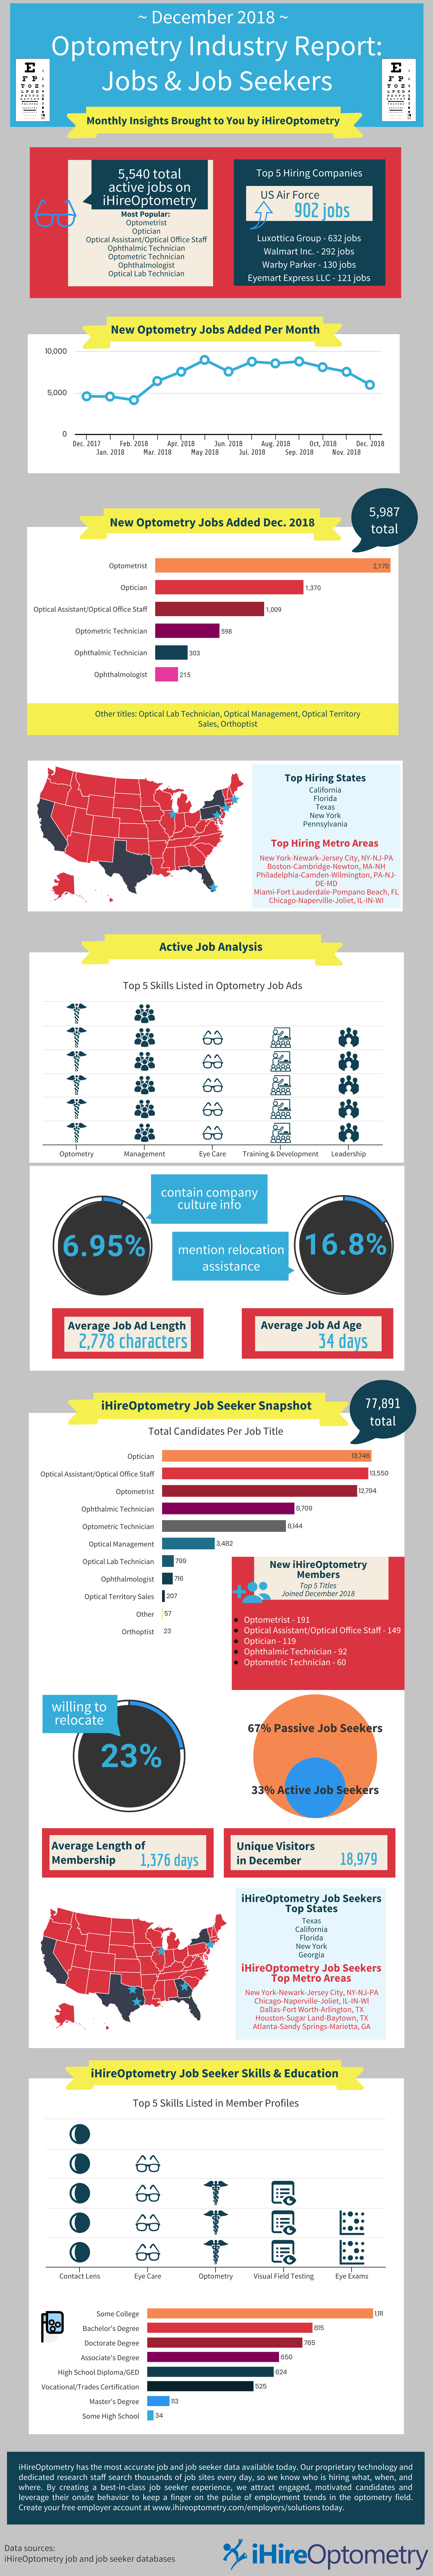 iHireOptometry’s eye care industry overview for December 2018. Infographic.